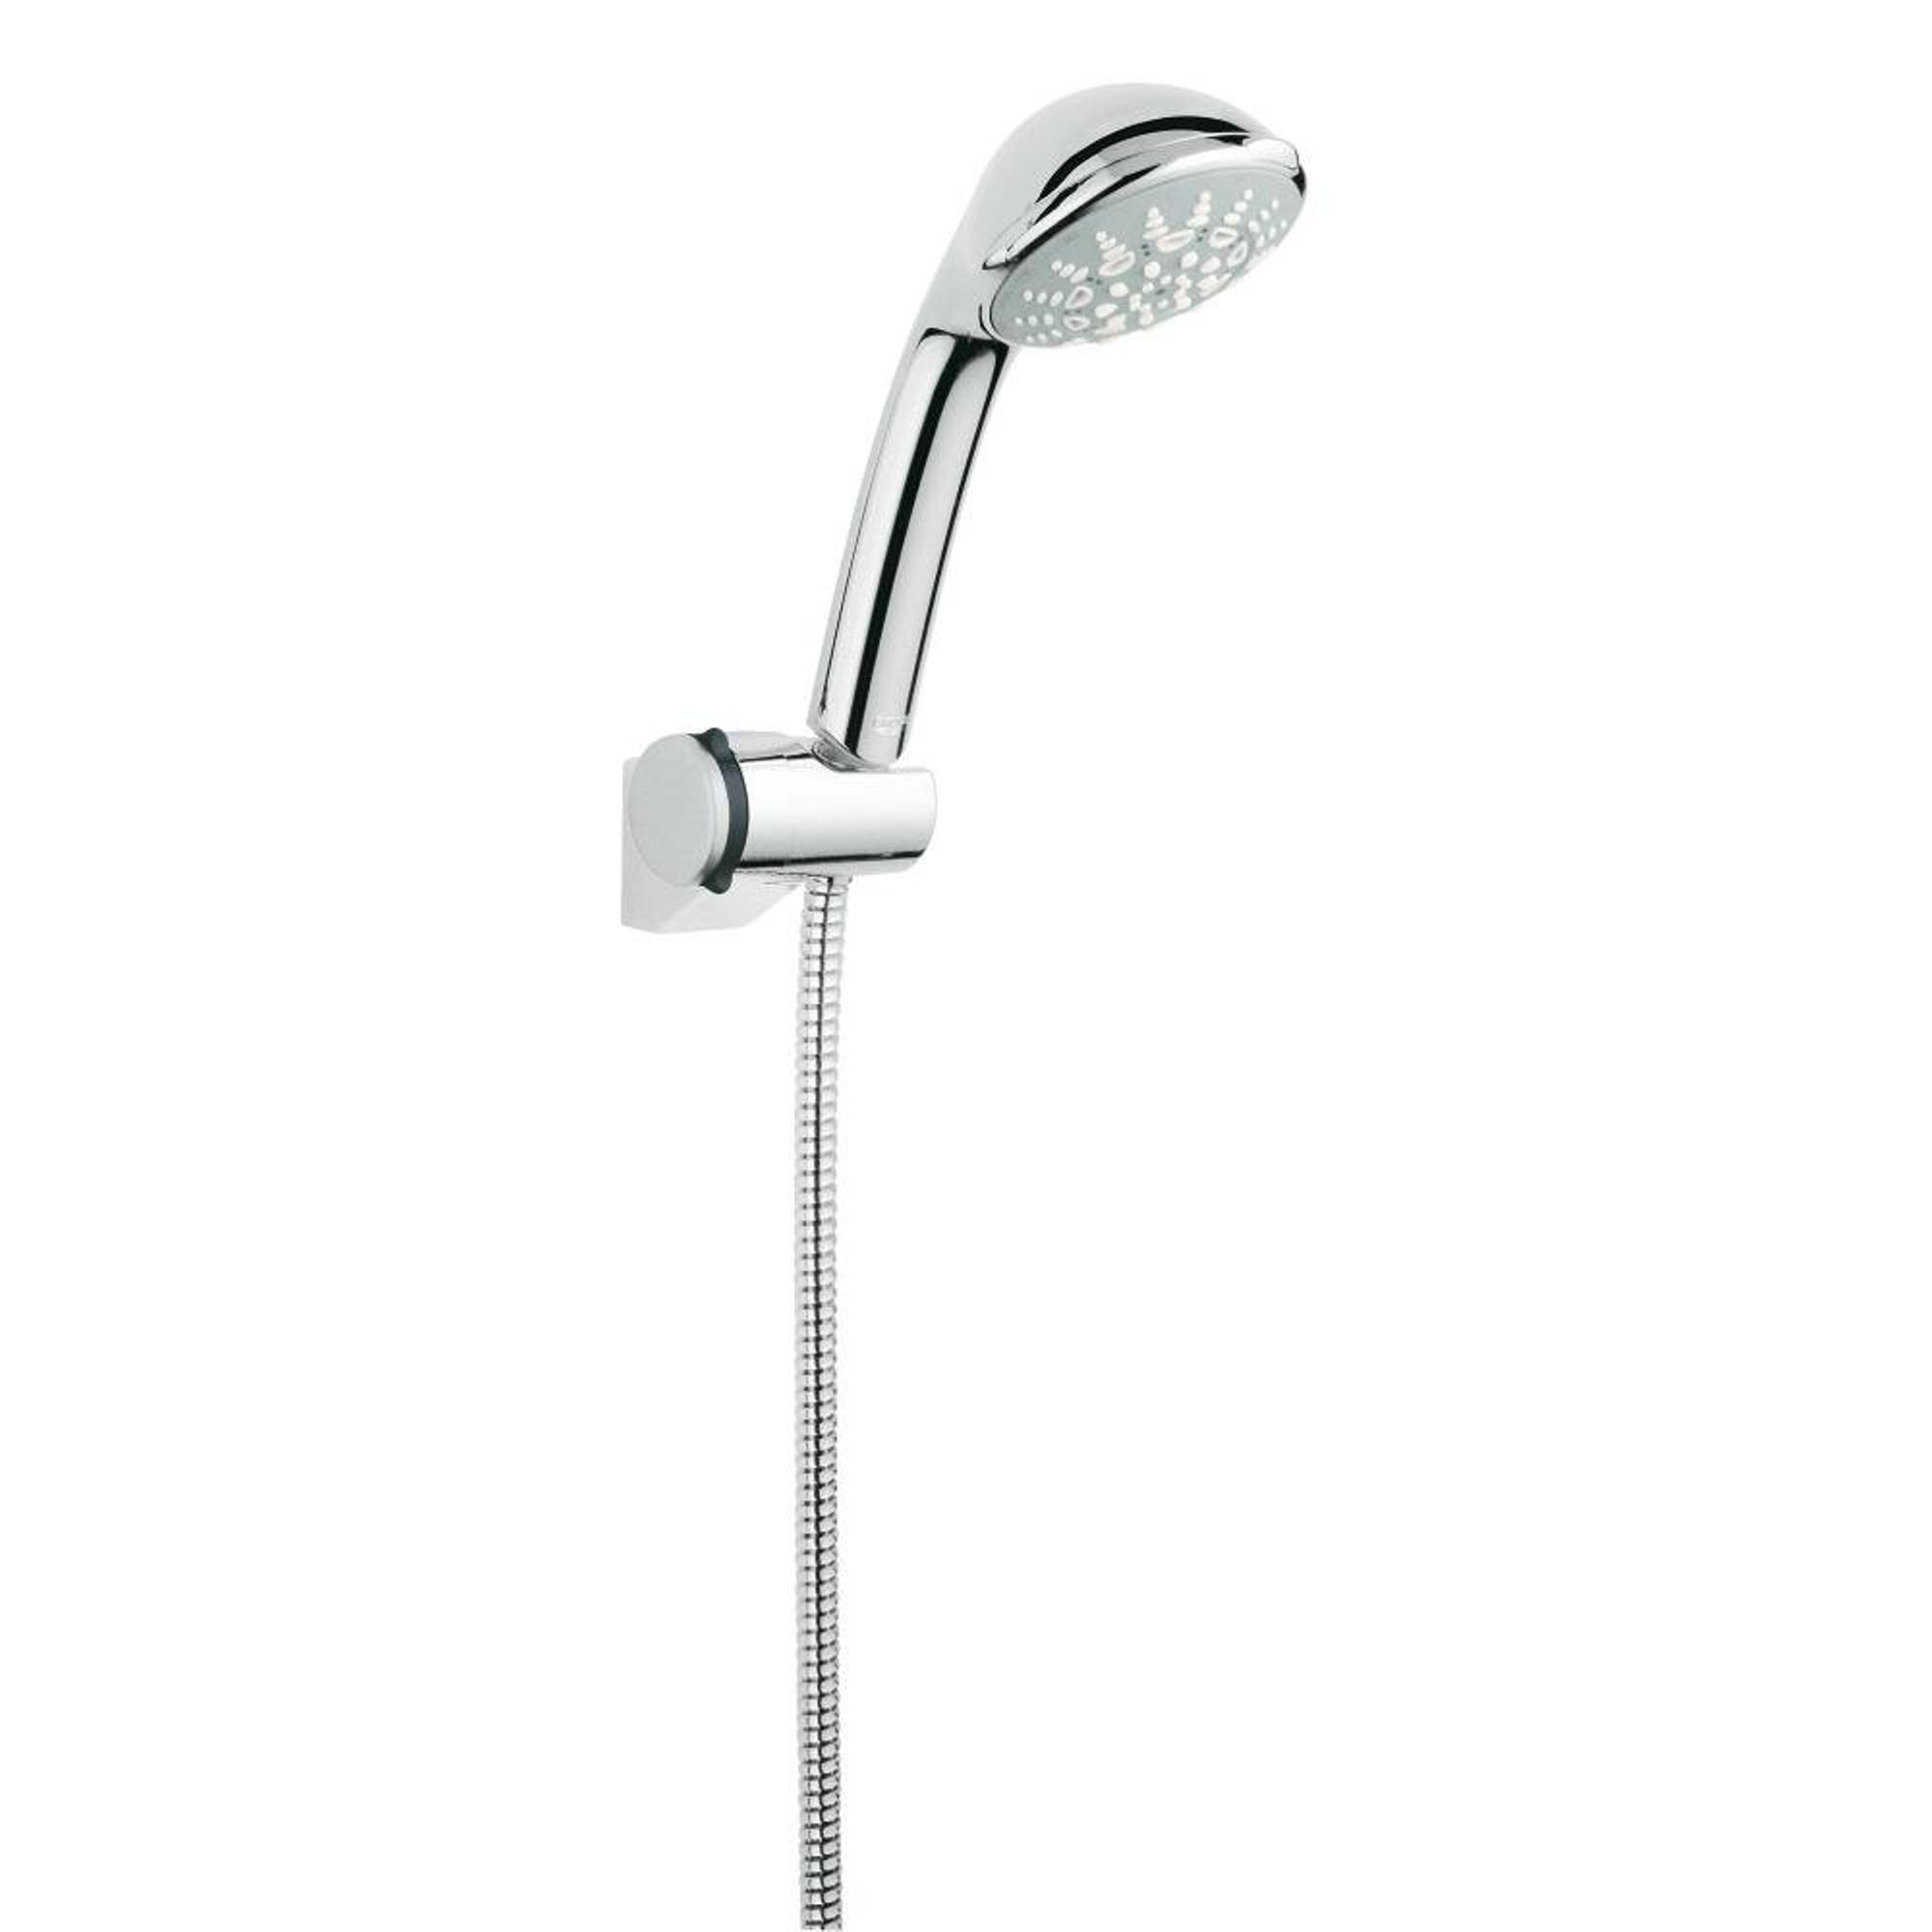 GROHE Relexa Support mural pour douchette universel amovible chrome -  28623000 